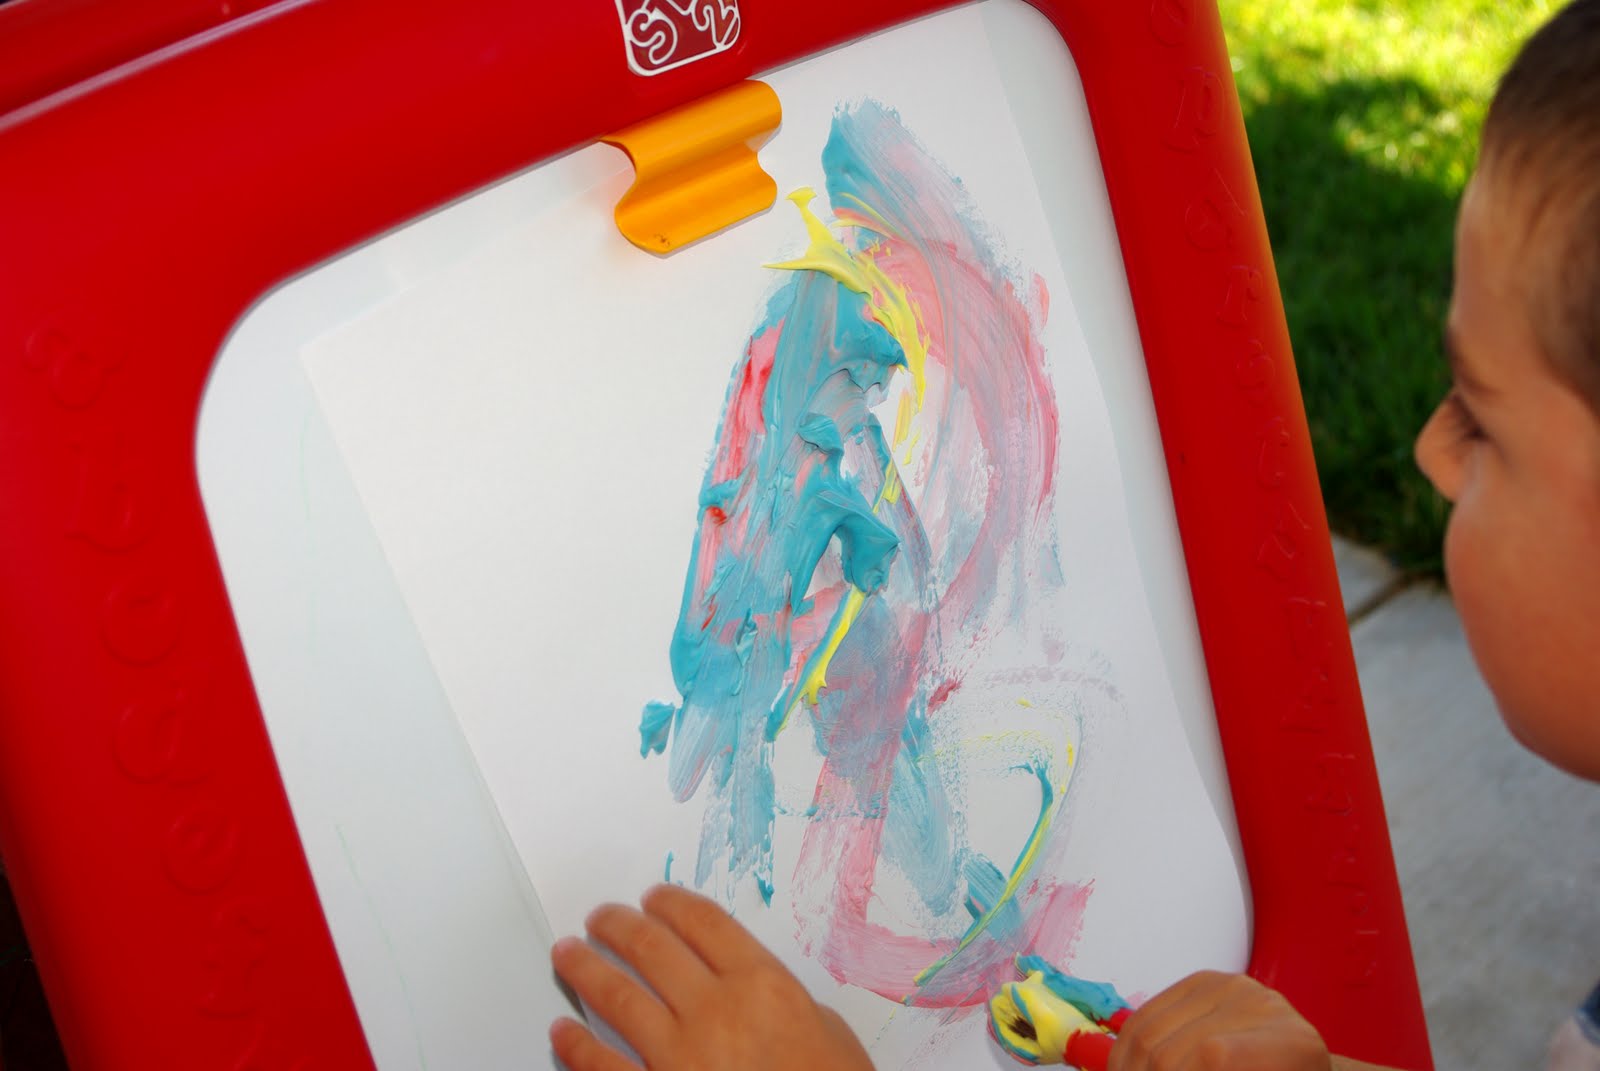 shaving cream paint picture on easel 